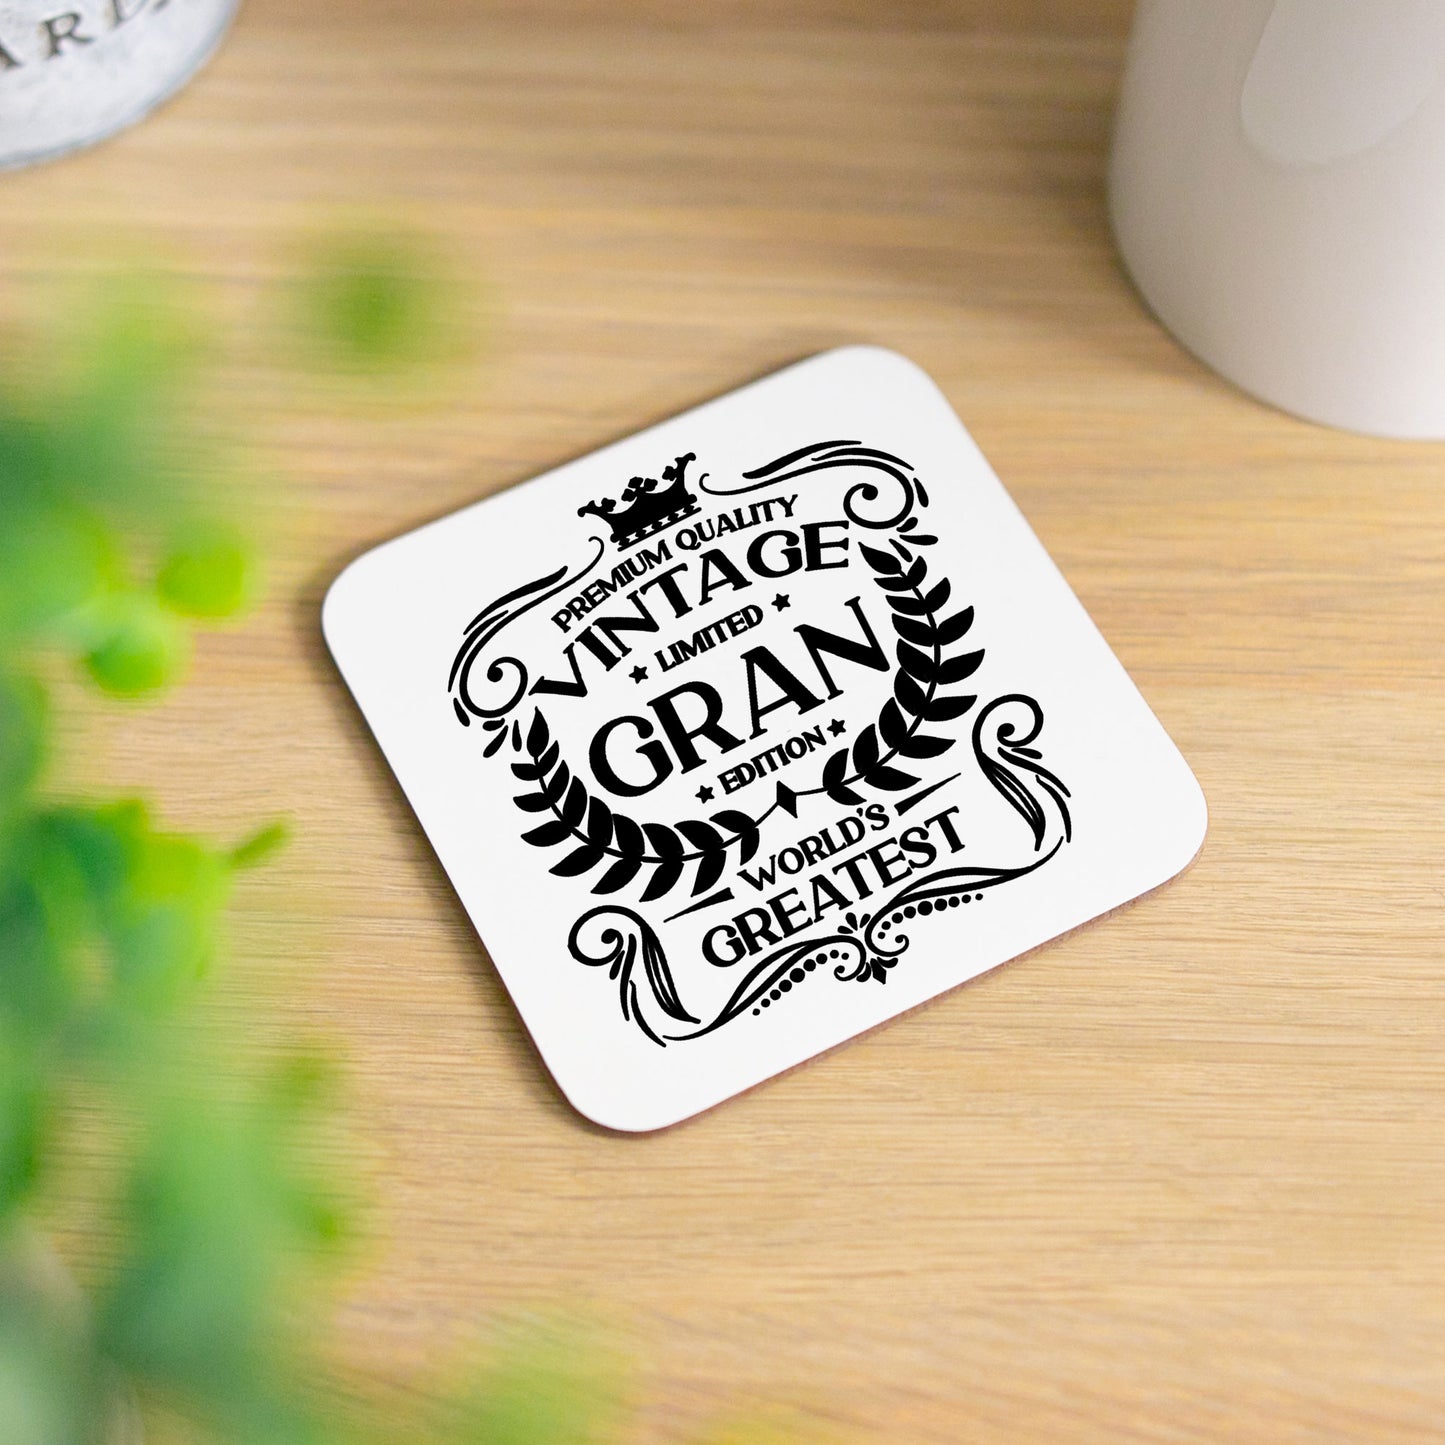 Vintage Worlds Greatest Gran Mug and/or Coaster  - Always Looking Good - Printed Coaster On Its Own  